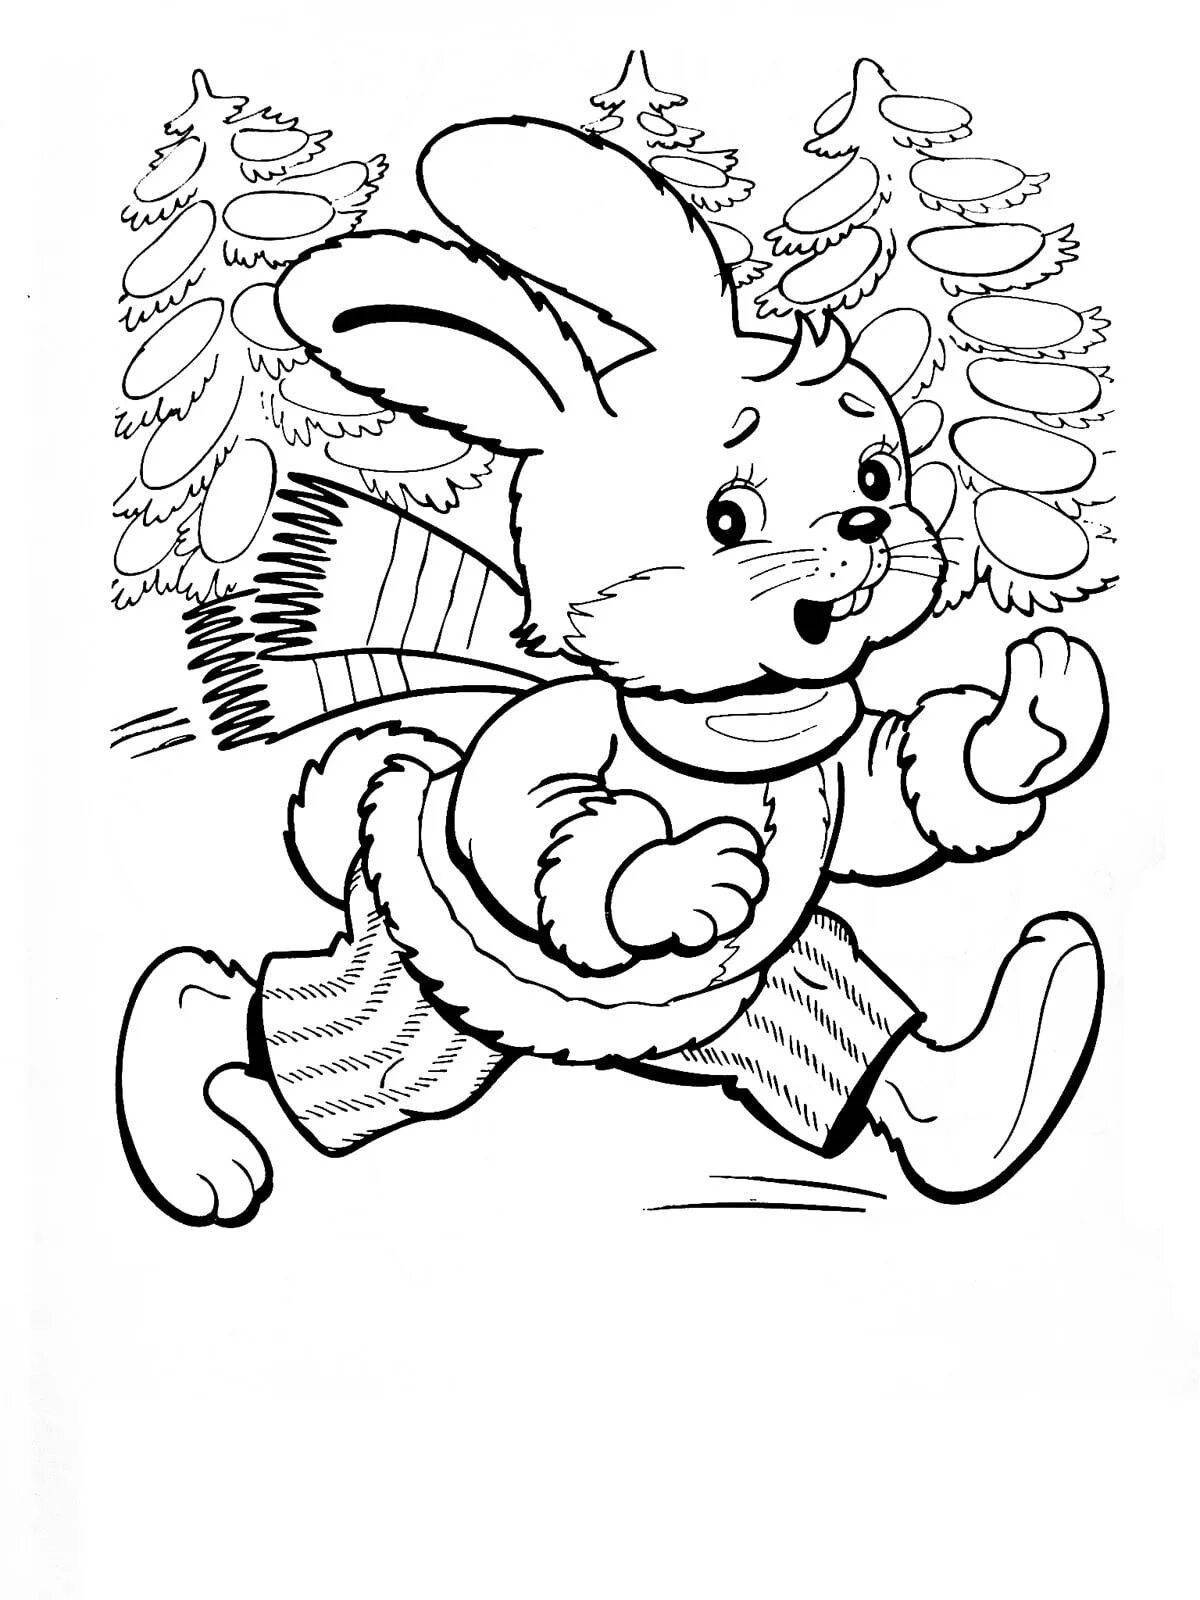 Elegant frost and hare coloring book